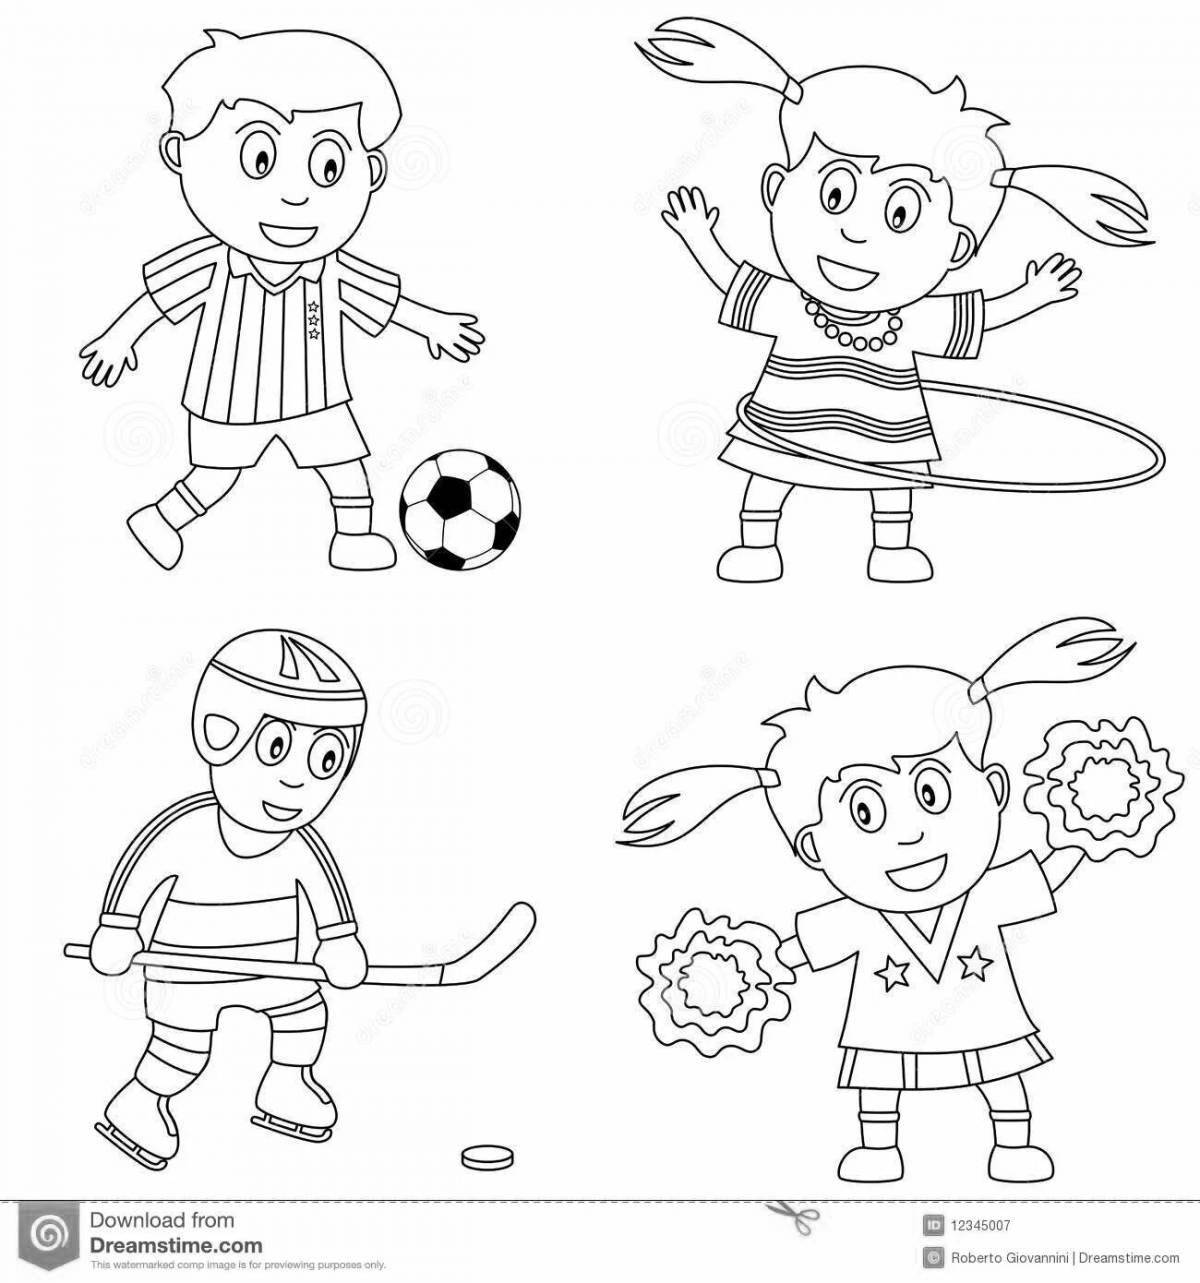 Sweet sports coloring book for kids 4-5 years old